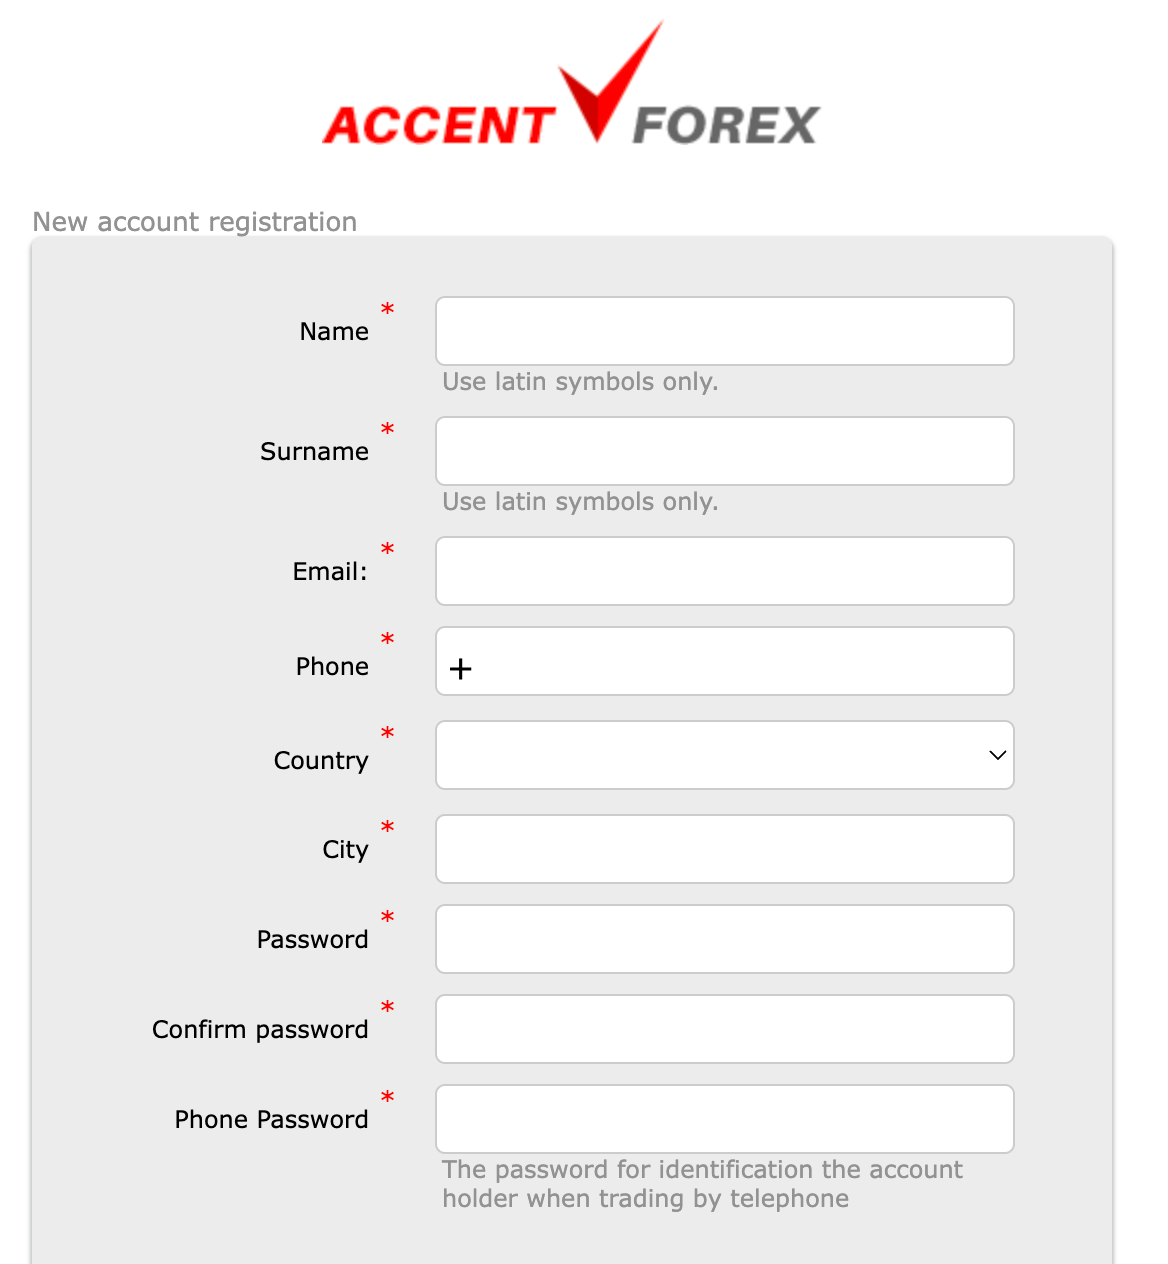 Review of AccentForex’s User Account — Registration form